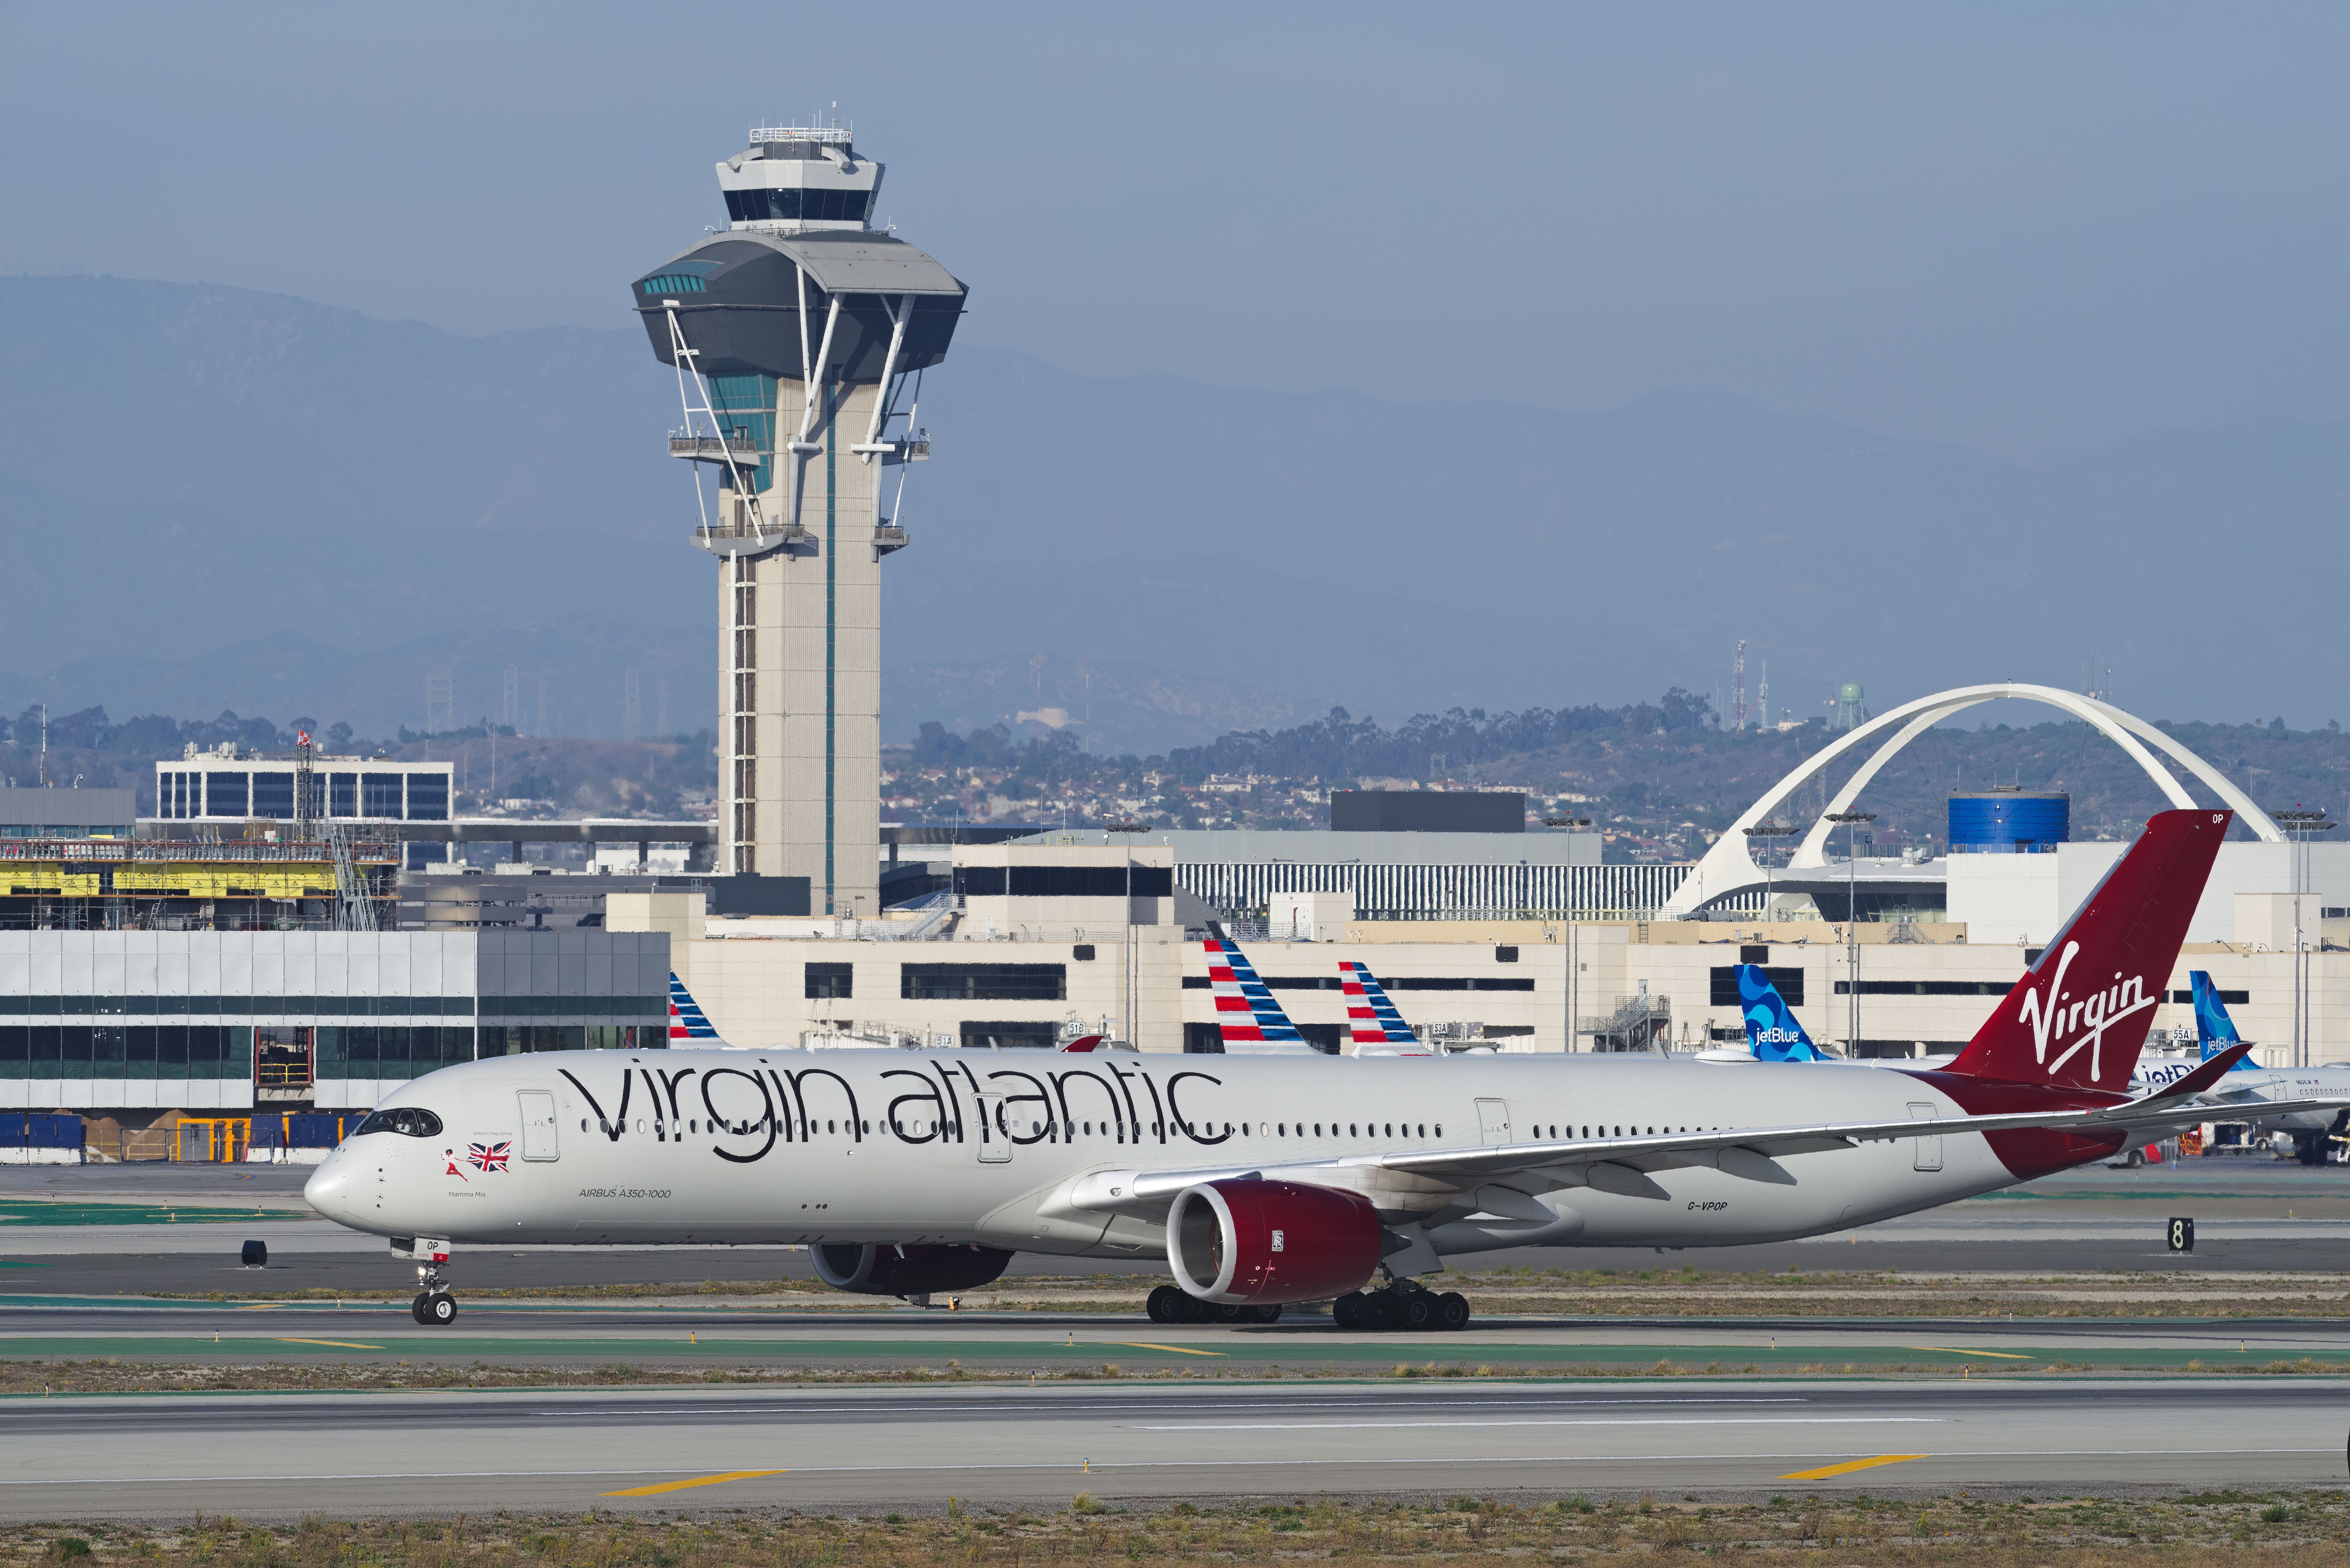 A Virgin Atlantic Airbus A350-1000 on the apron at Los Angeles International Airport.